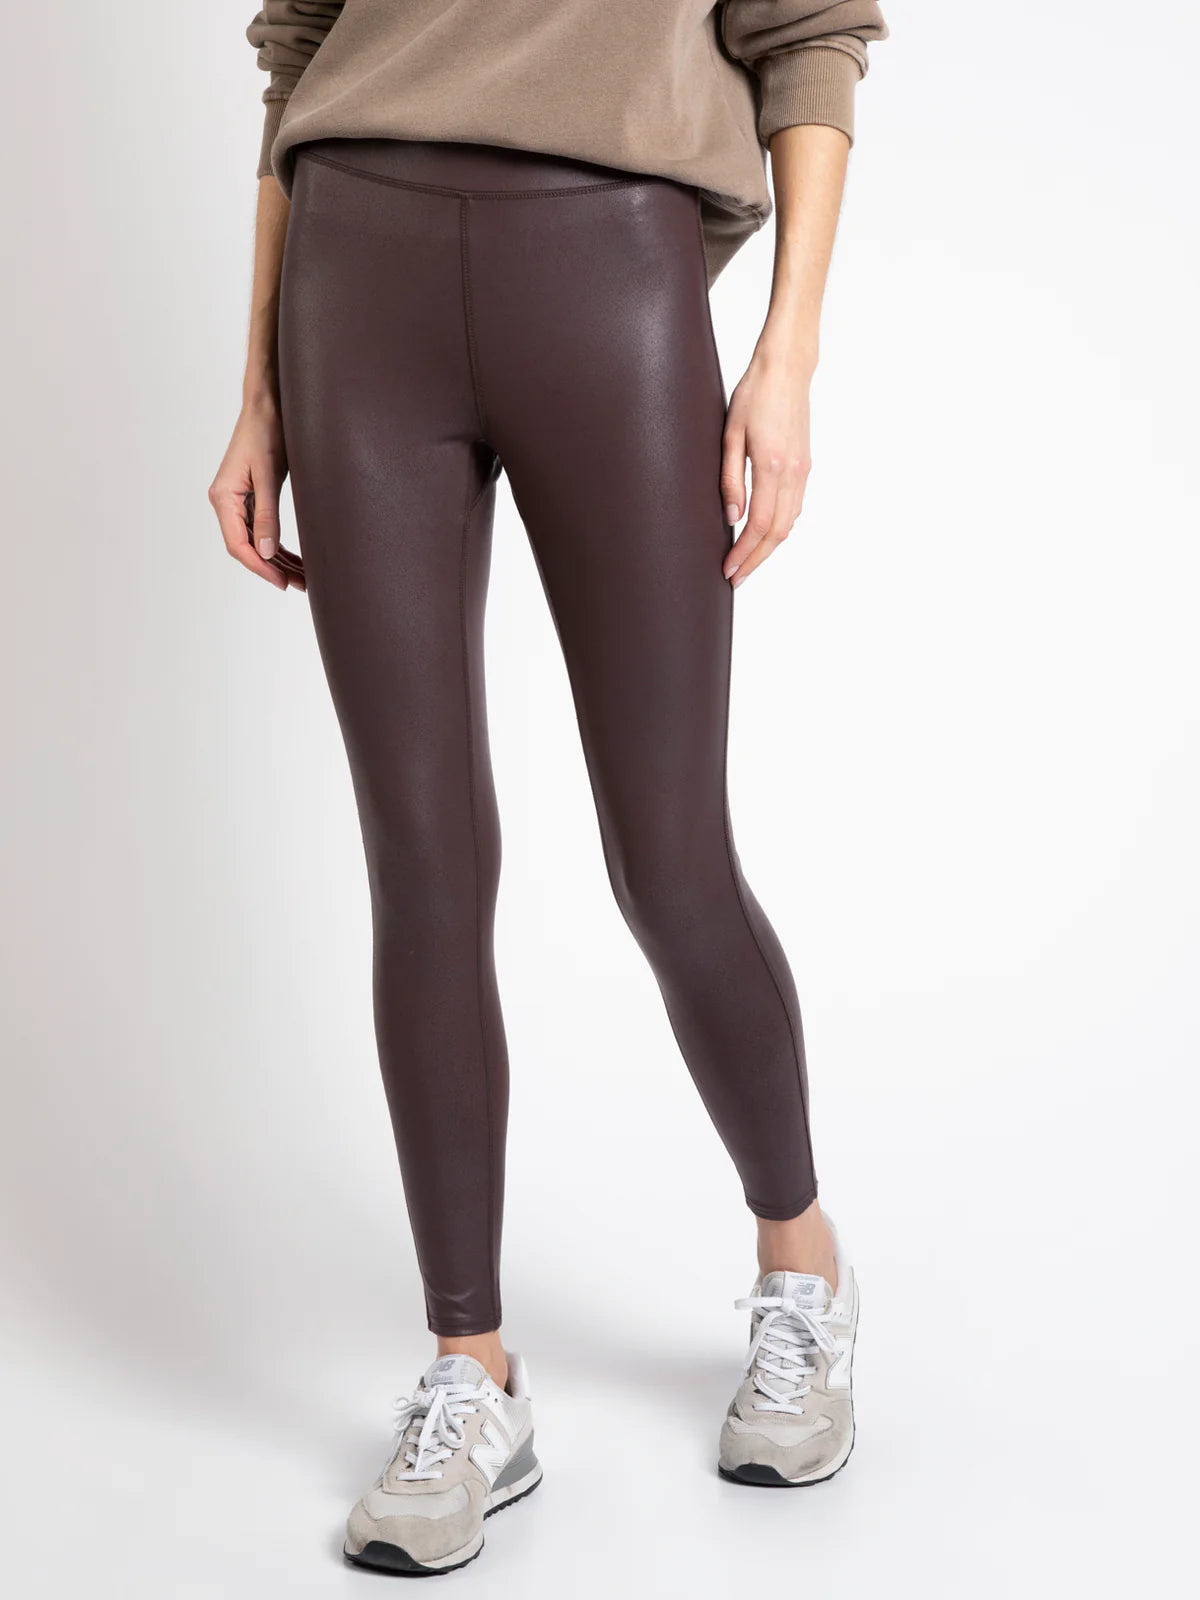 Spanx Faux Leather Legging – Love & Threads